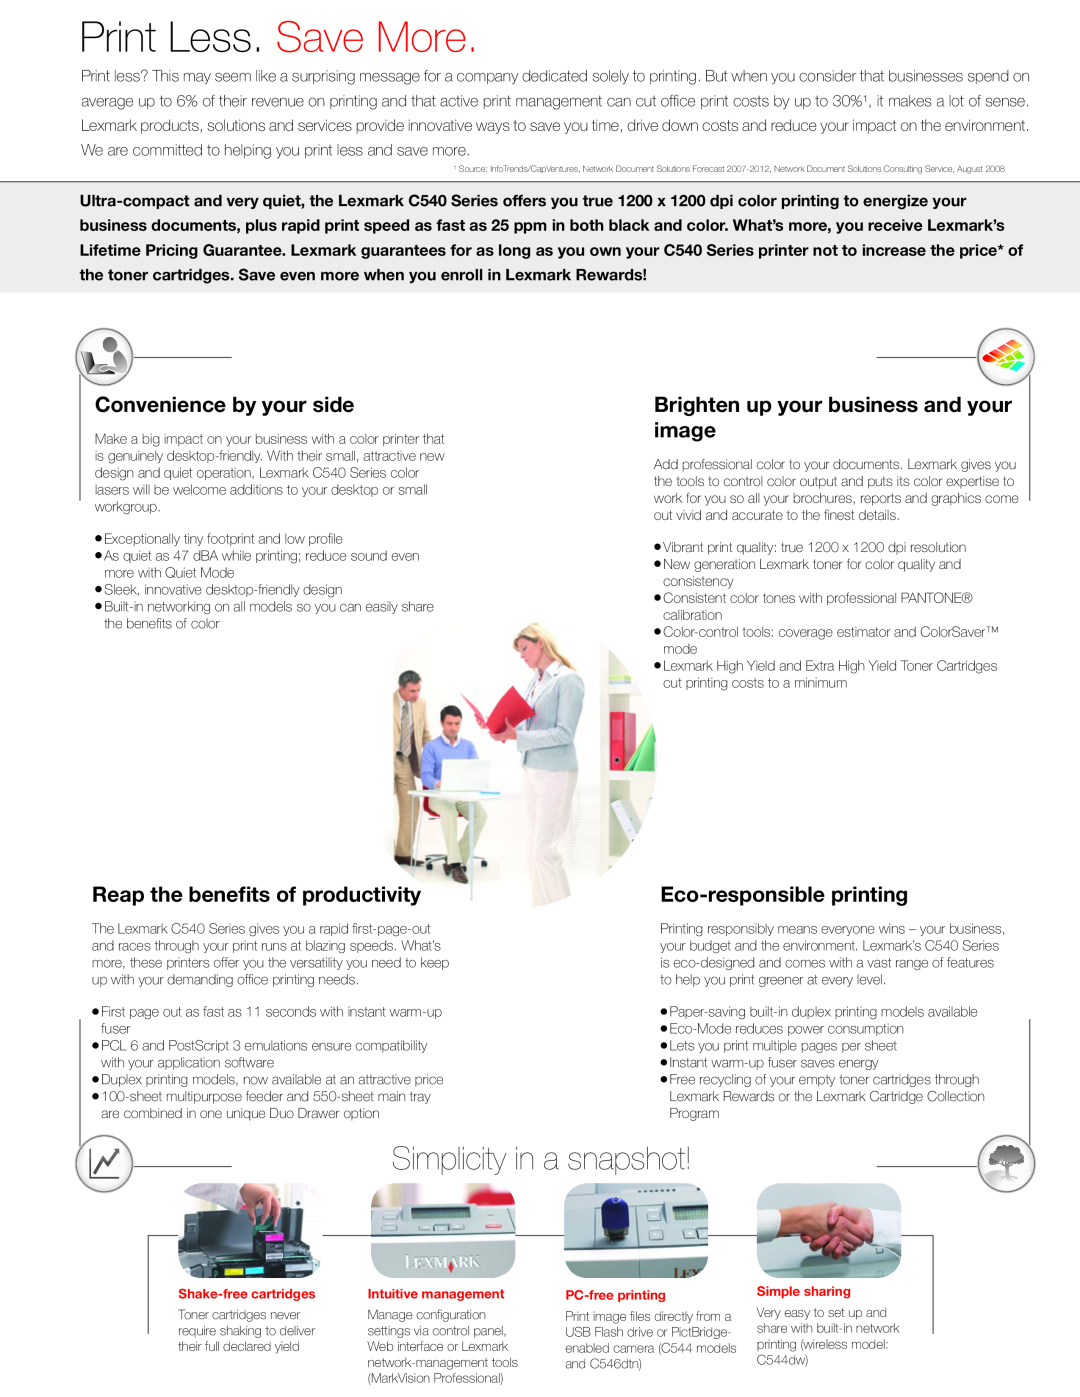 Lexmark 546dtn manual Simplicity in a snapshot, Print Less. Save More, Convenience by your side, Eco-responsible printing 